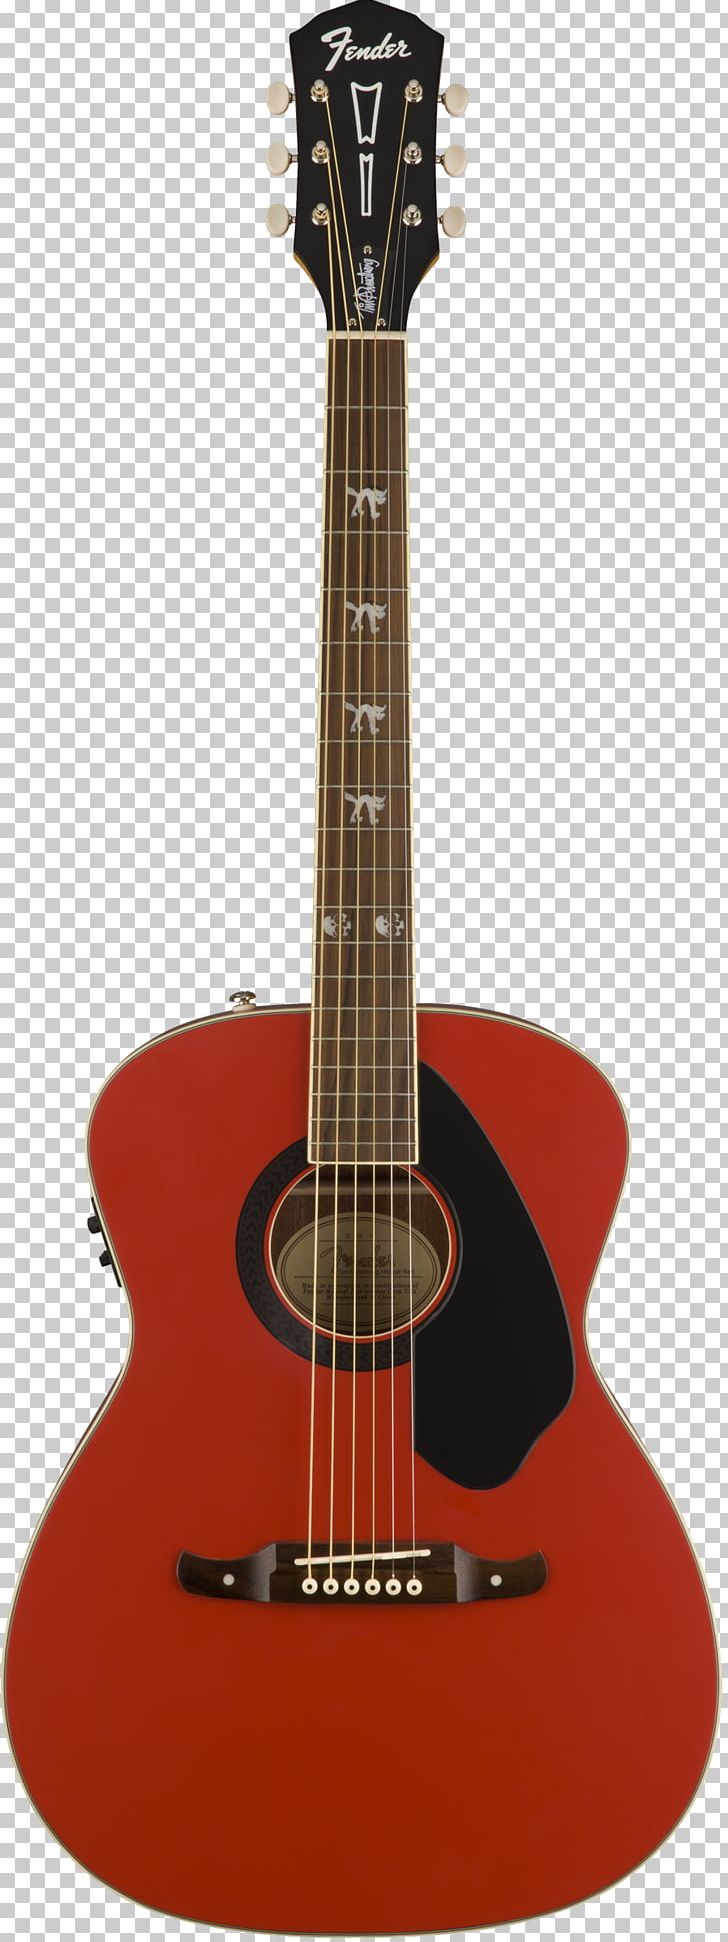 Fender Stratocaster Acoustic-electric Guitar Steel-string Acoustic Guitar PNG, Clipart, Acoustic Electric Guitar, Acoustic Guitar, Gretsch, Guitar Accessory, Musical Instruments Free PNG Download